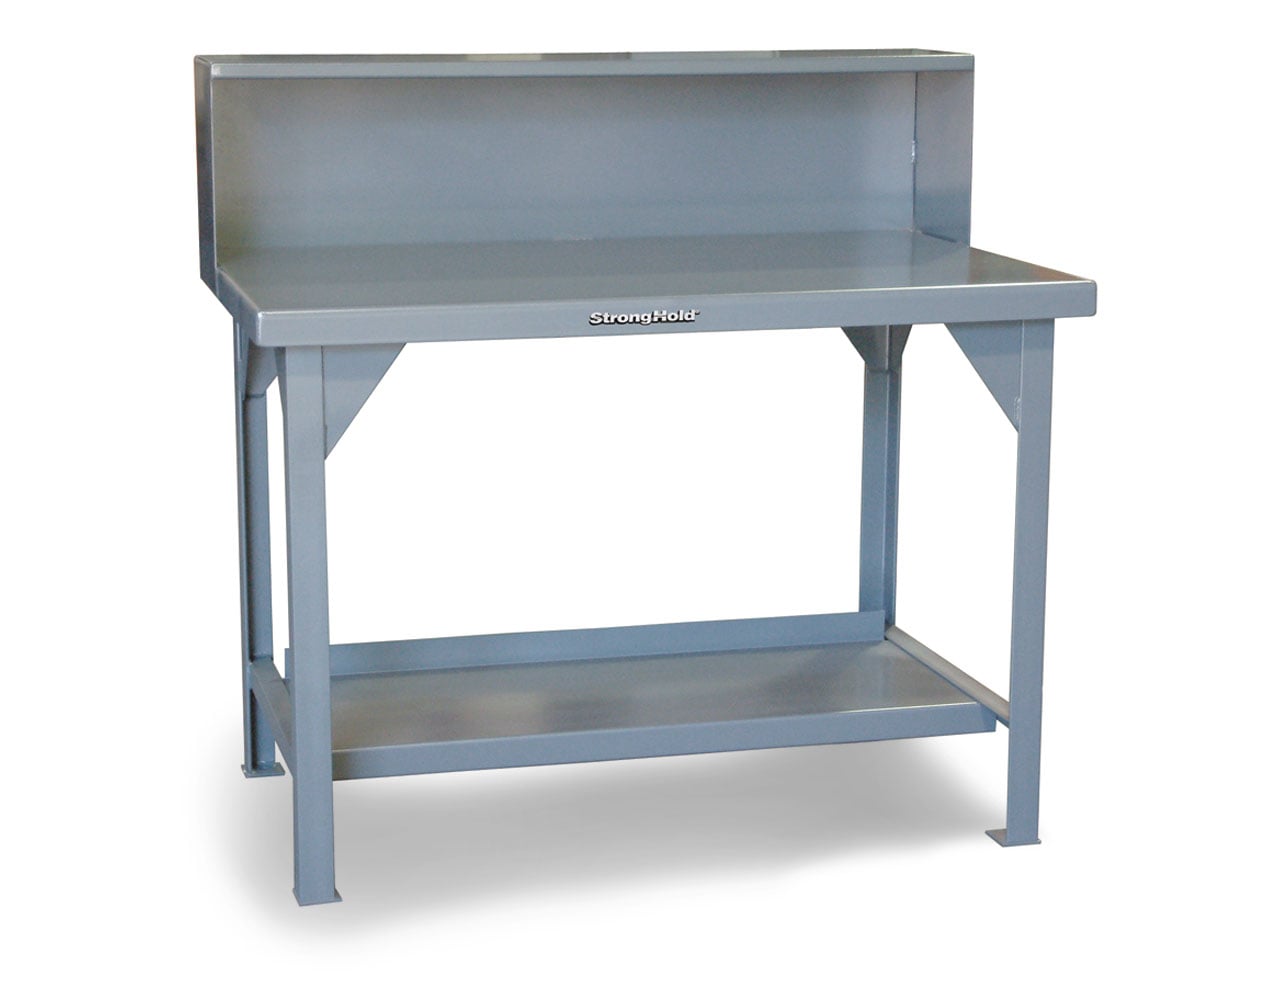 Extreme Duty 7 GA Shop Table with Riser Shelf - 60 In. W x 36 In. D x 46 In. H